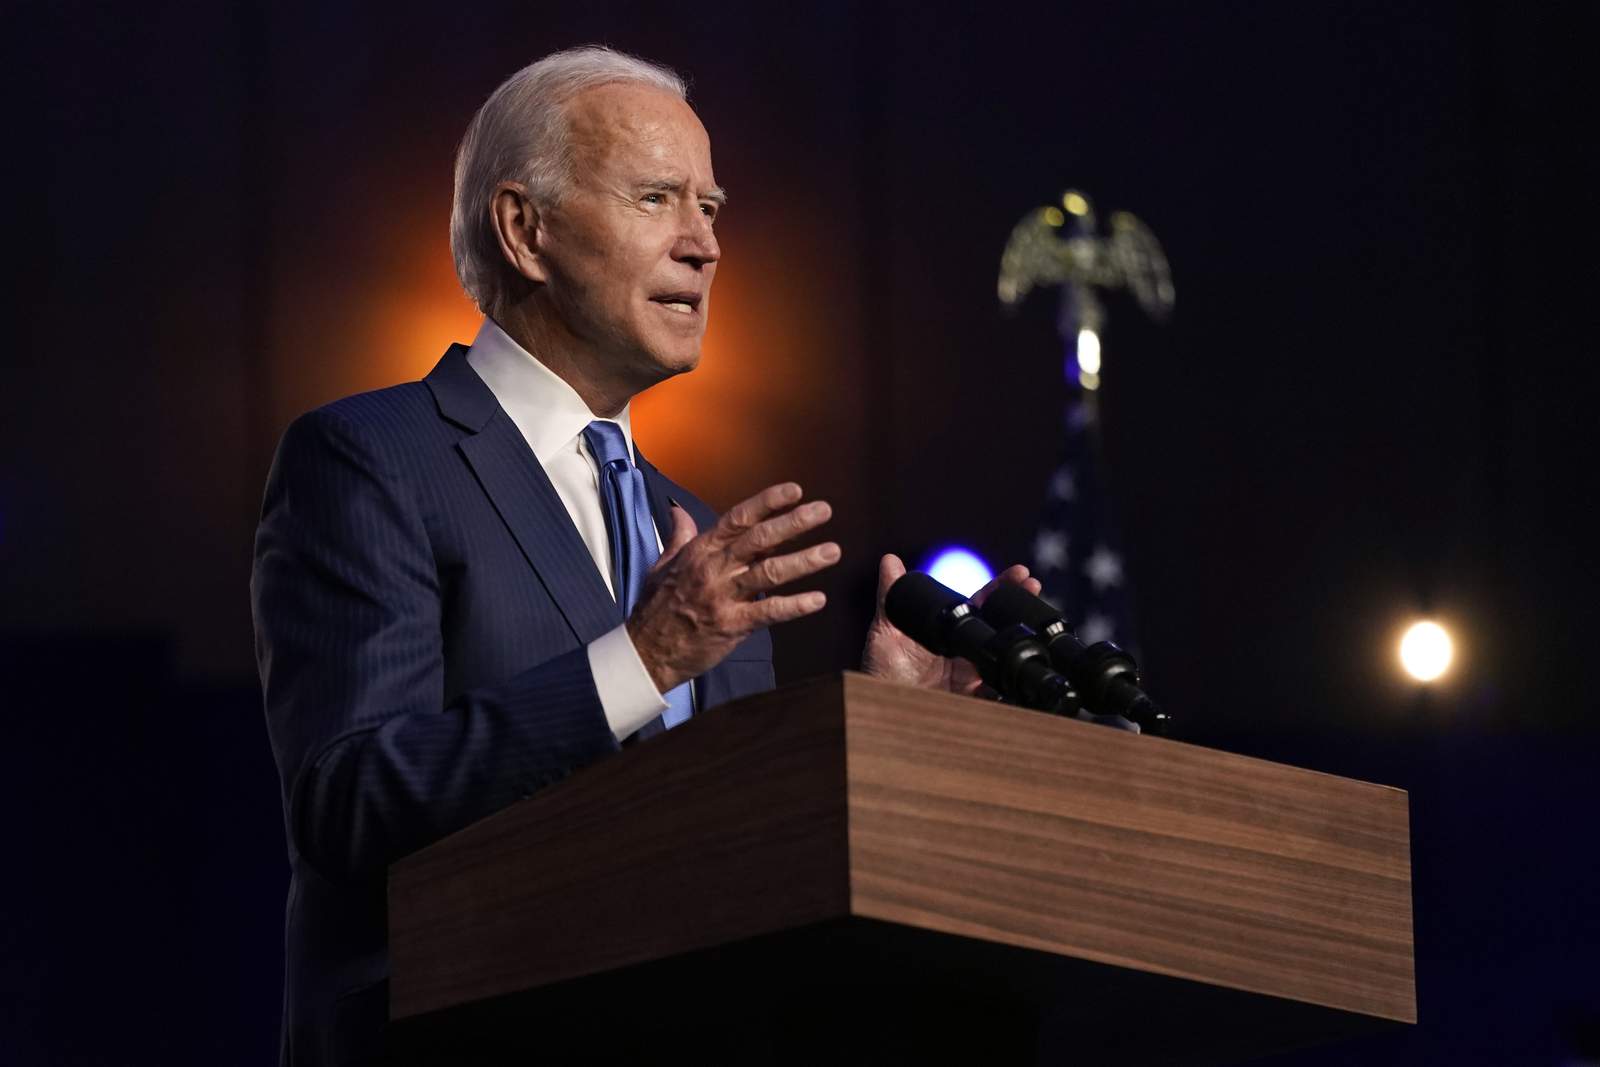 Biden looks to restore, expand Obama administration policies